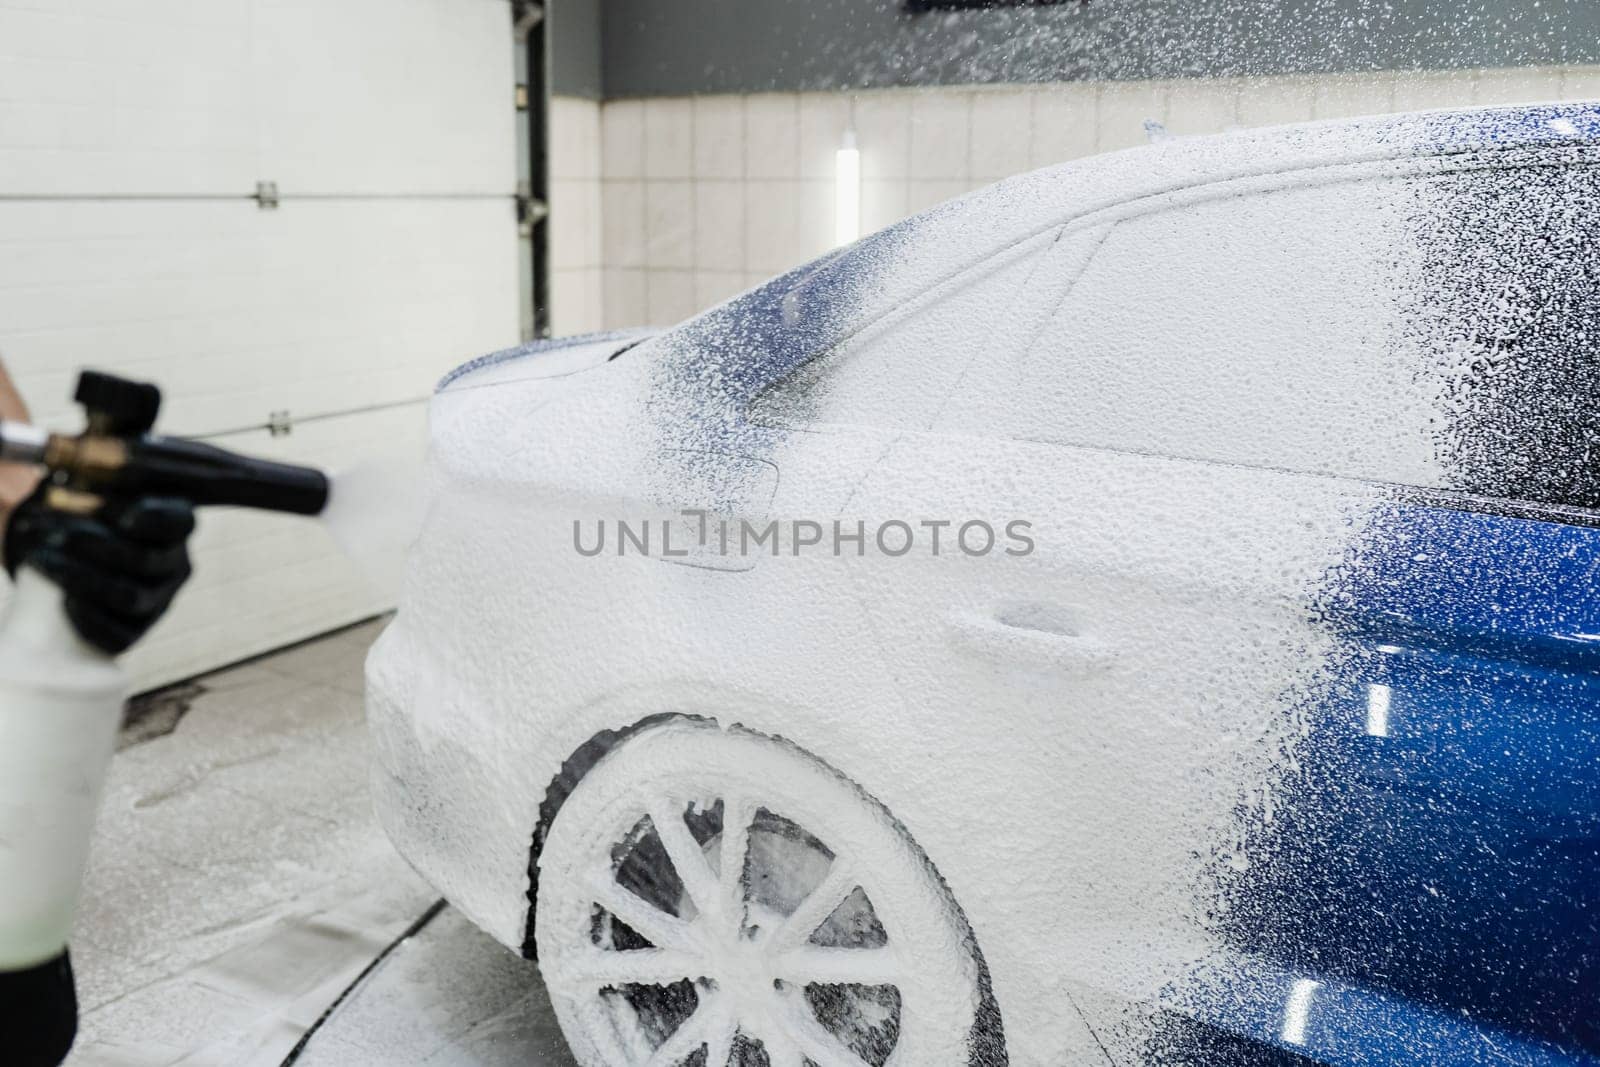 Process of spraying foam on the car body in the garage. Second phase of detailing washing in car service. Car washer does full body car wash